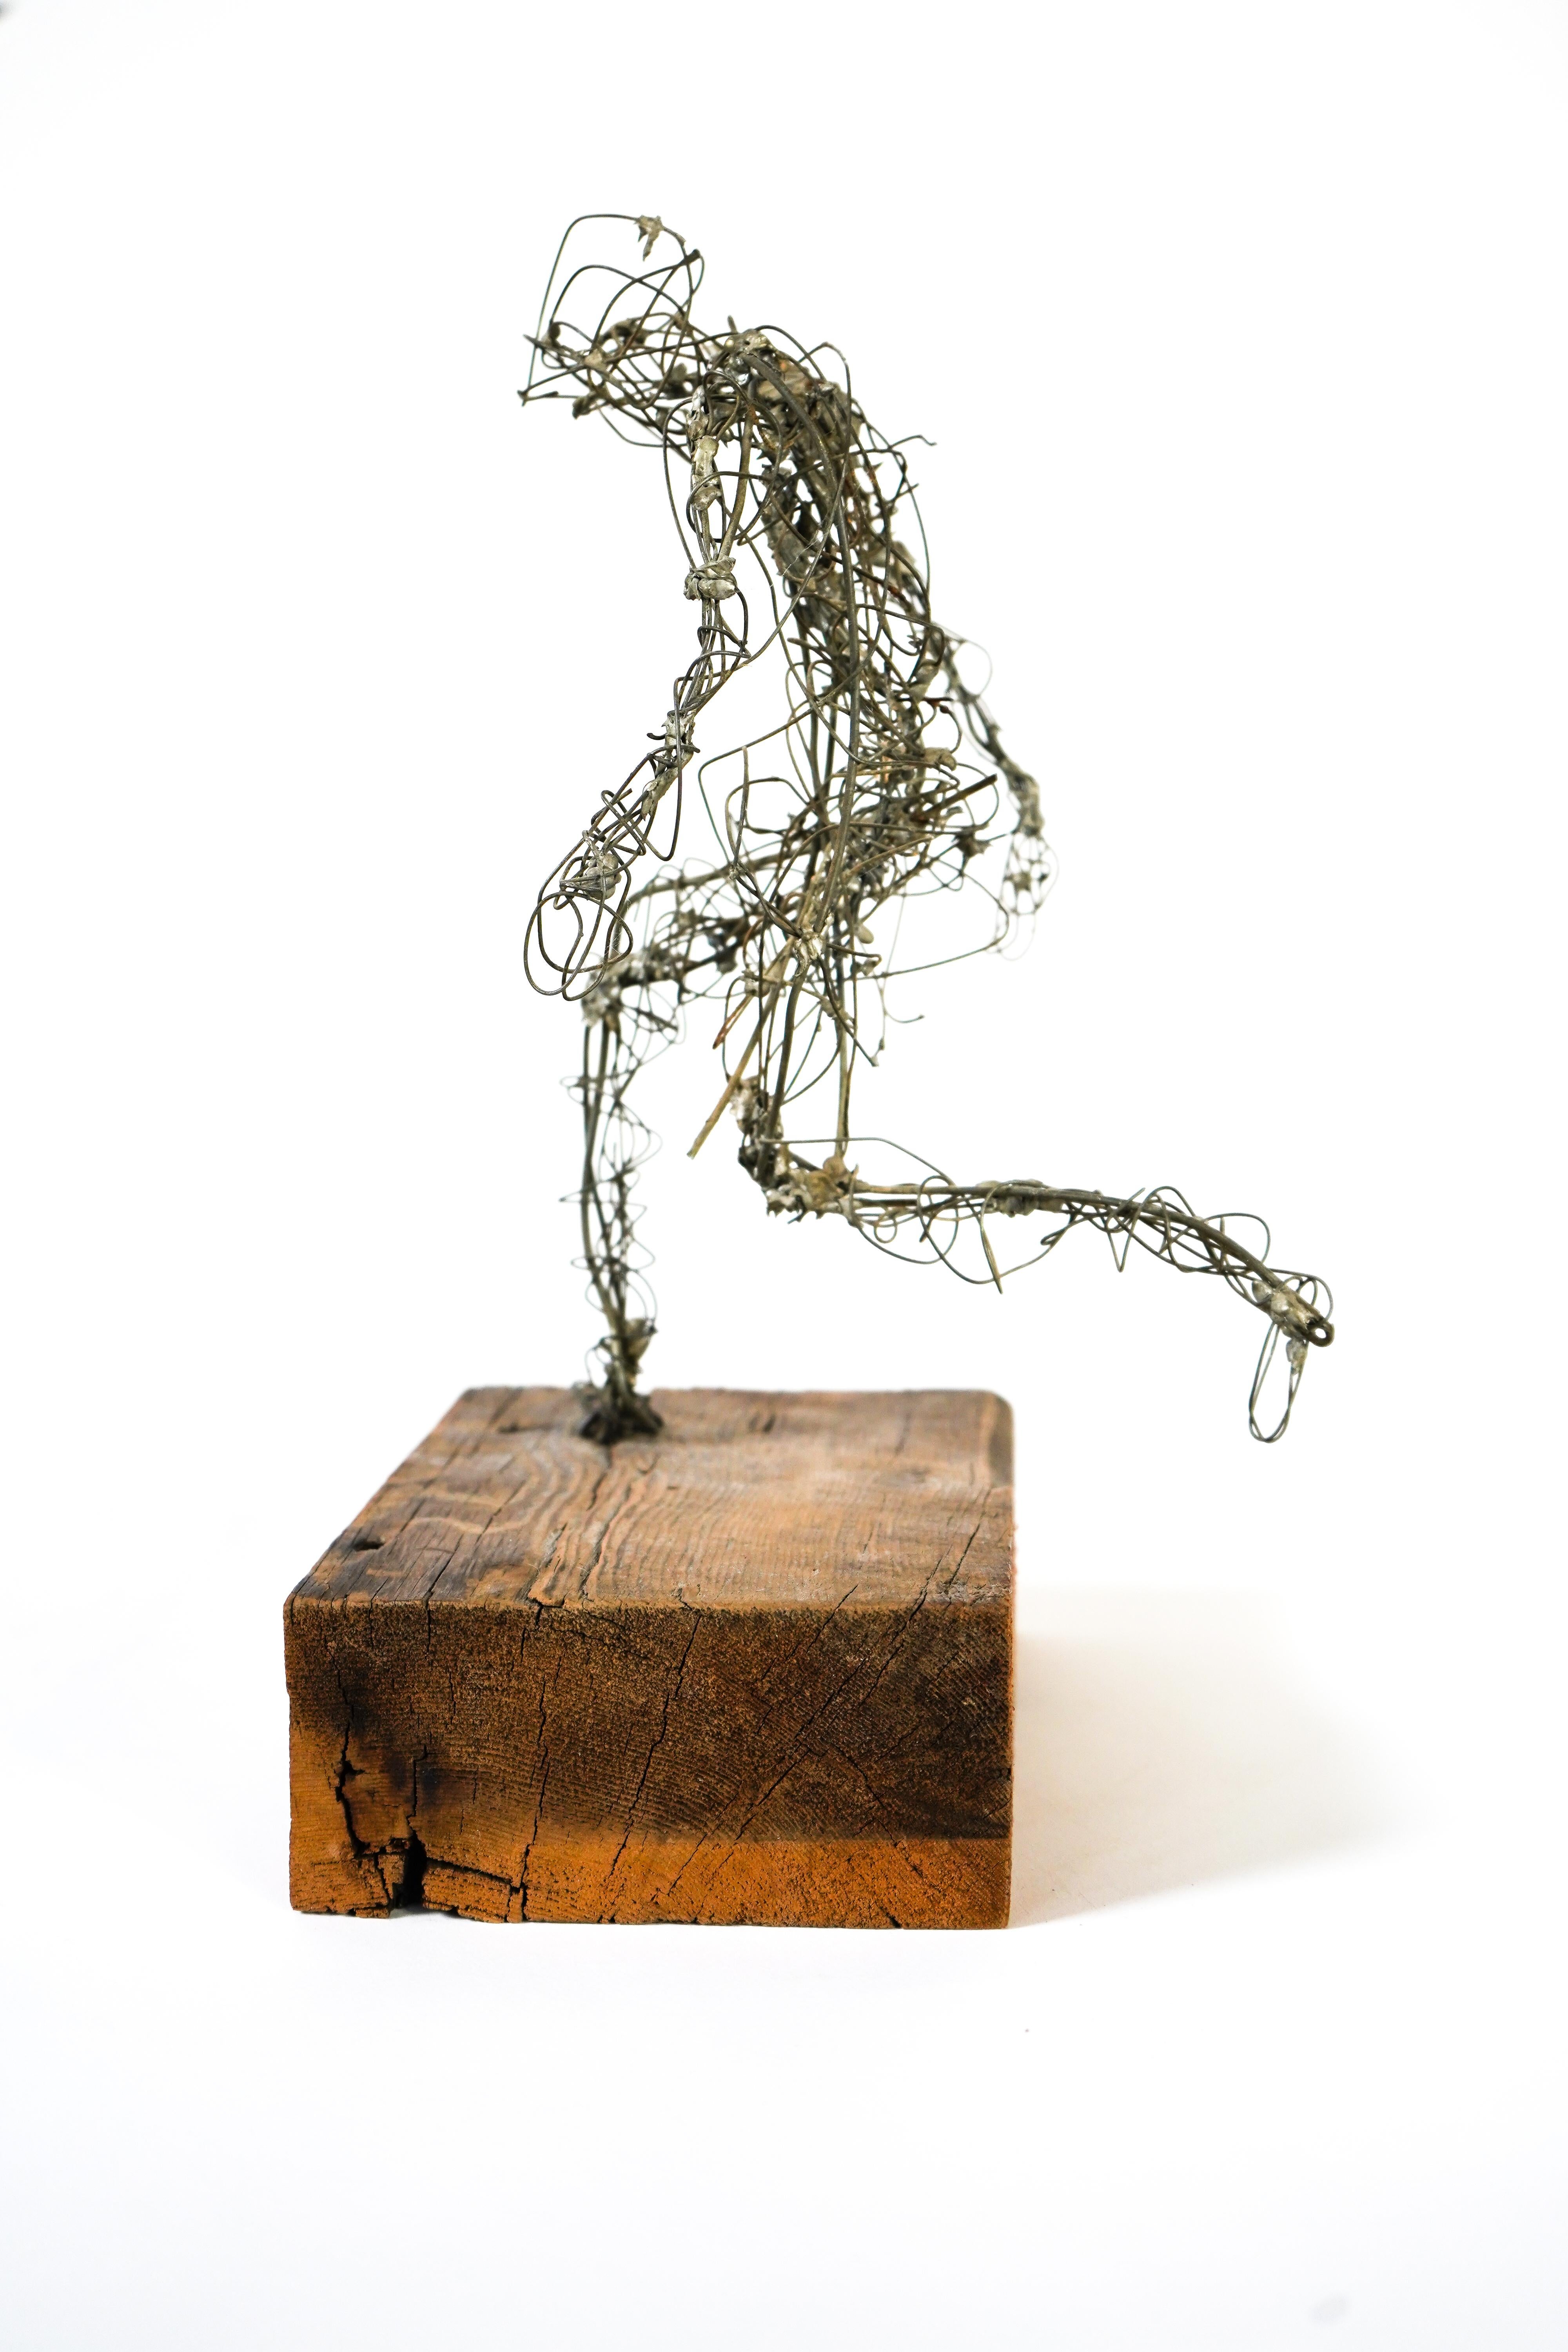 Mid-20th Century Frances Venardos Gialamas Abstract Wire Figure In Motion Sculpture For Sale